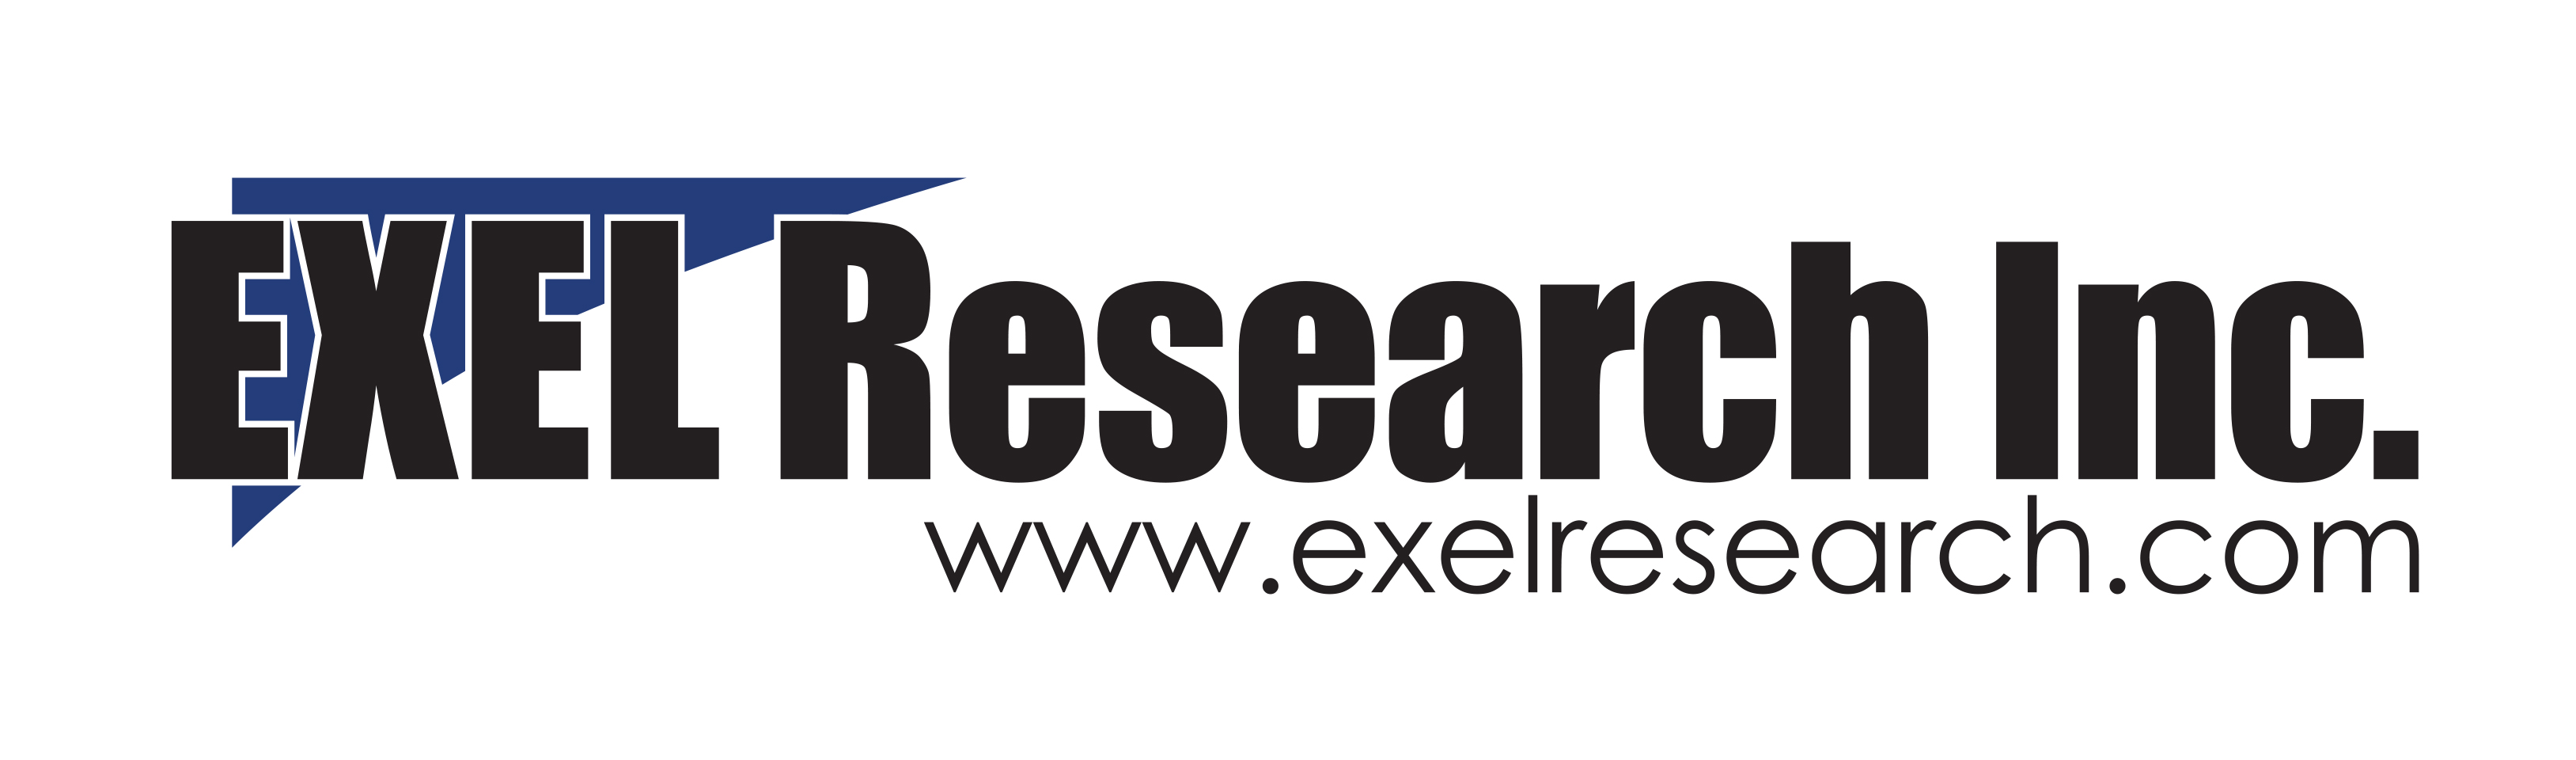 Exel Research Inc.